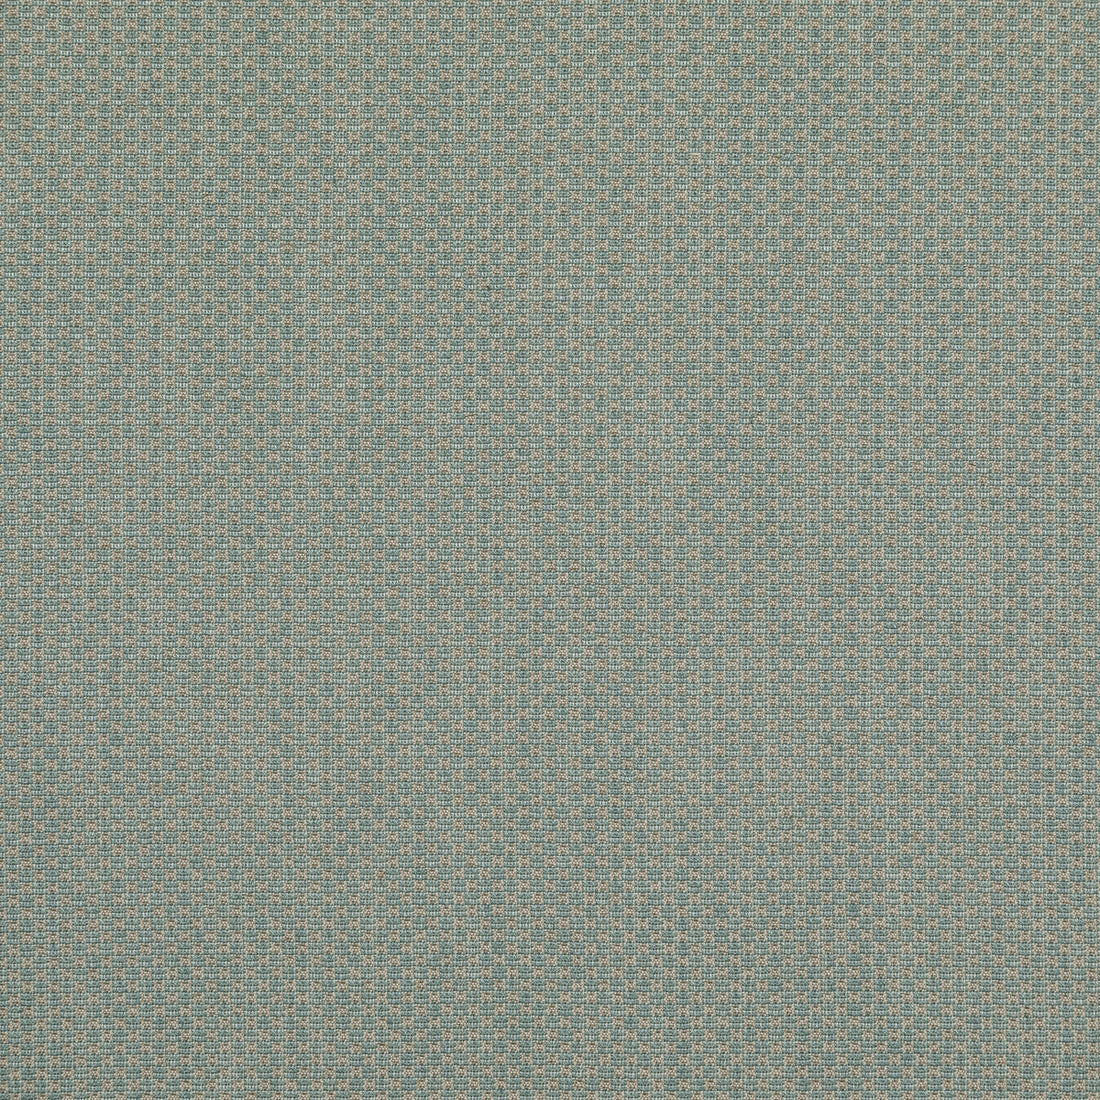 Devon fabric in aquamarine color - pattern BFC-3685.13.0 - by Lee Jofa in the Blithfield collection